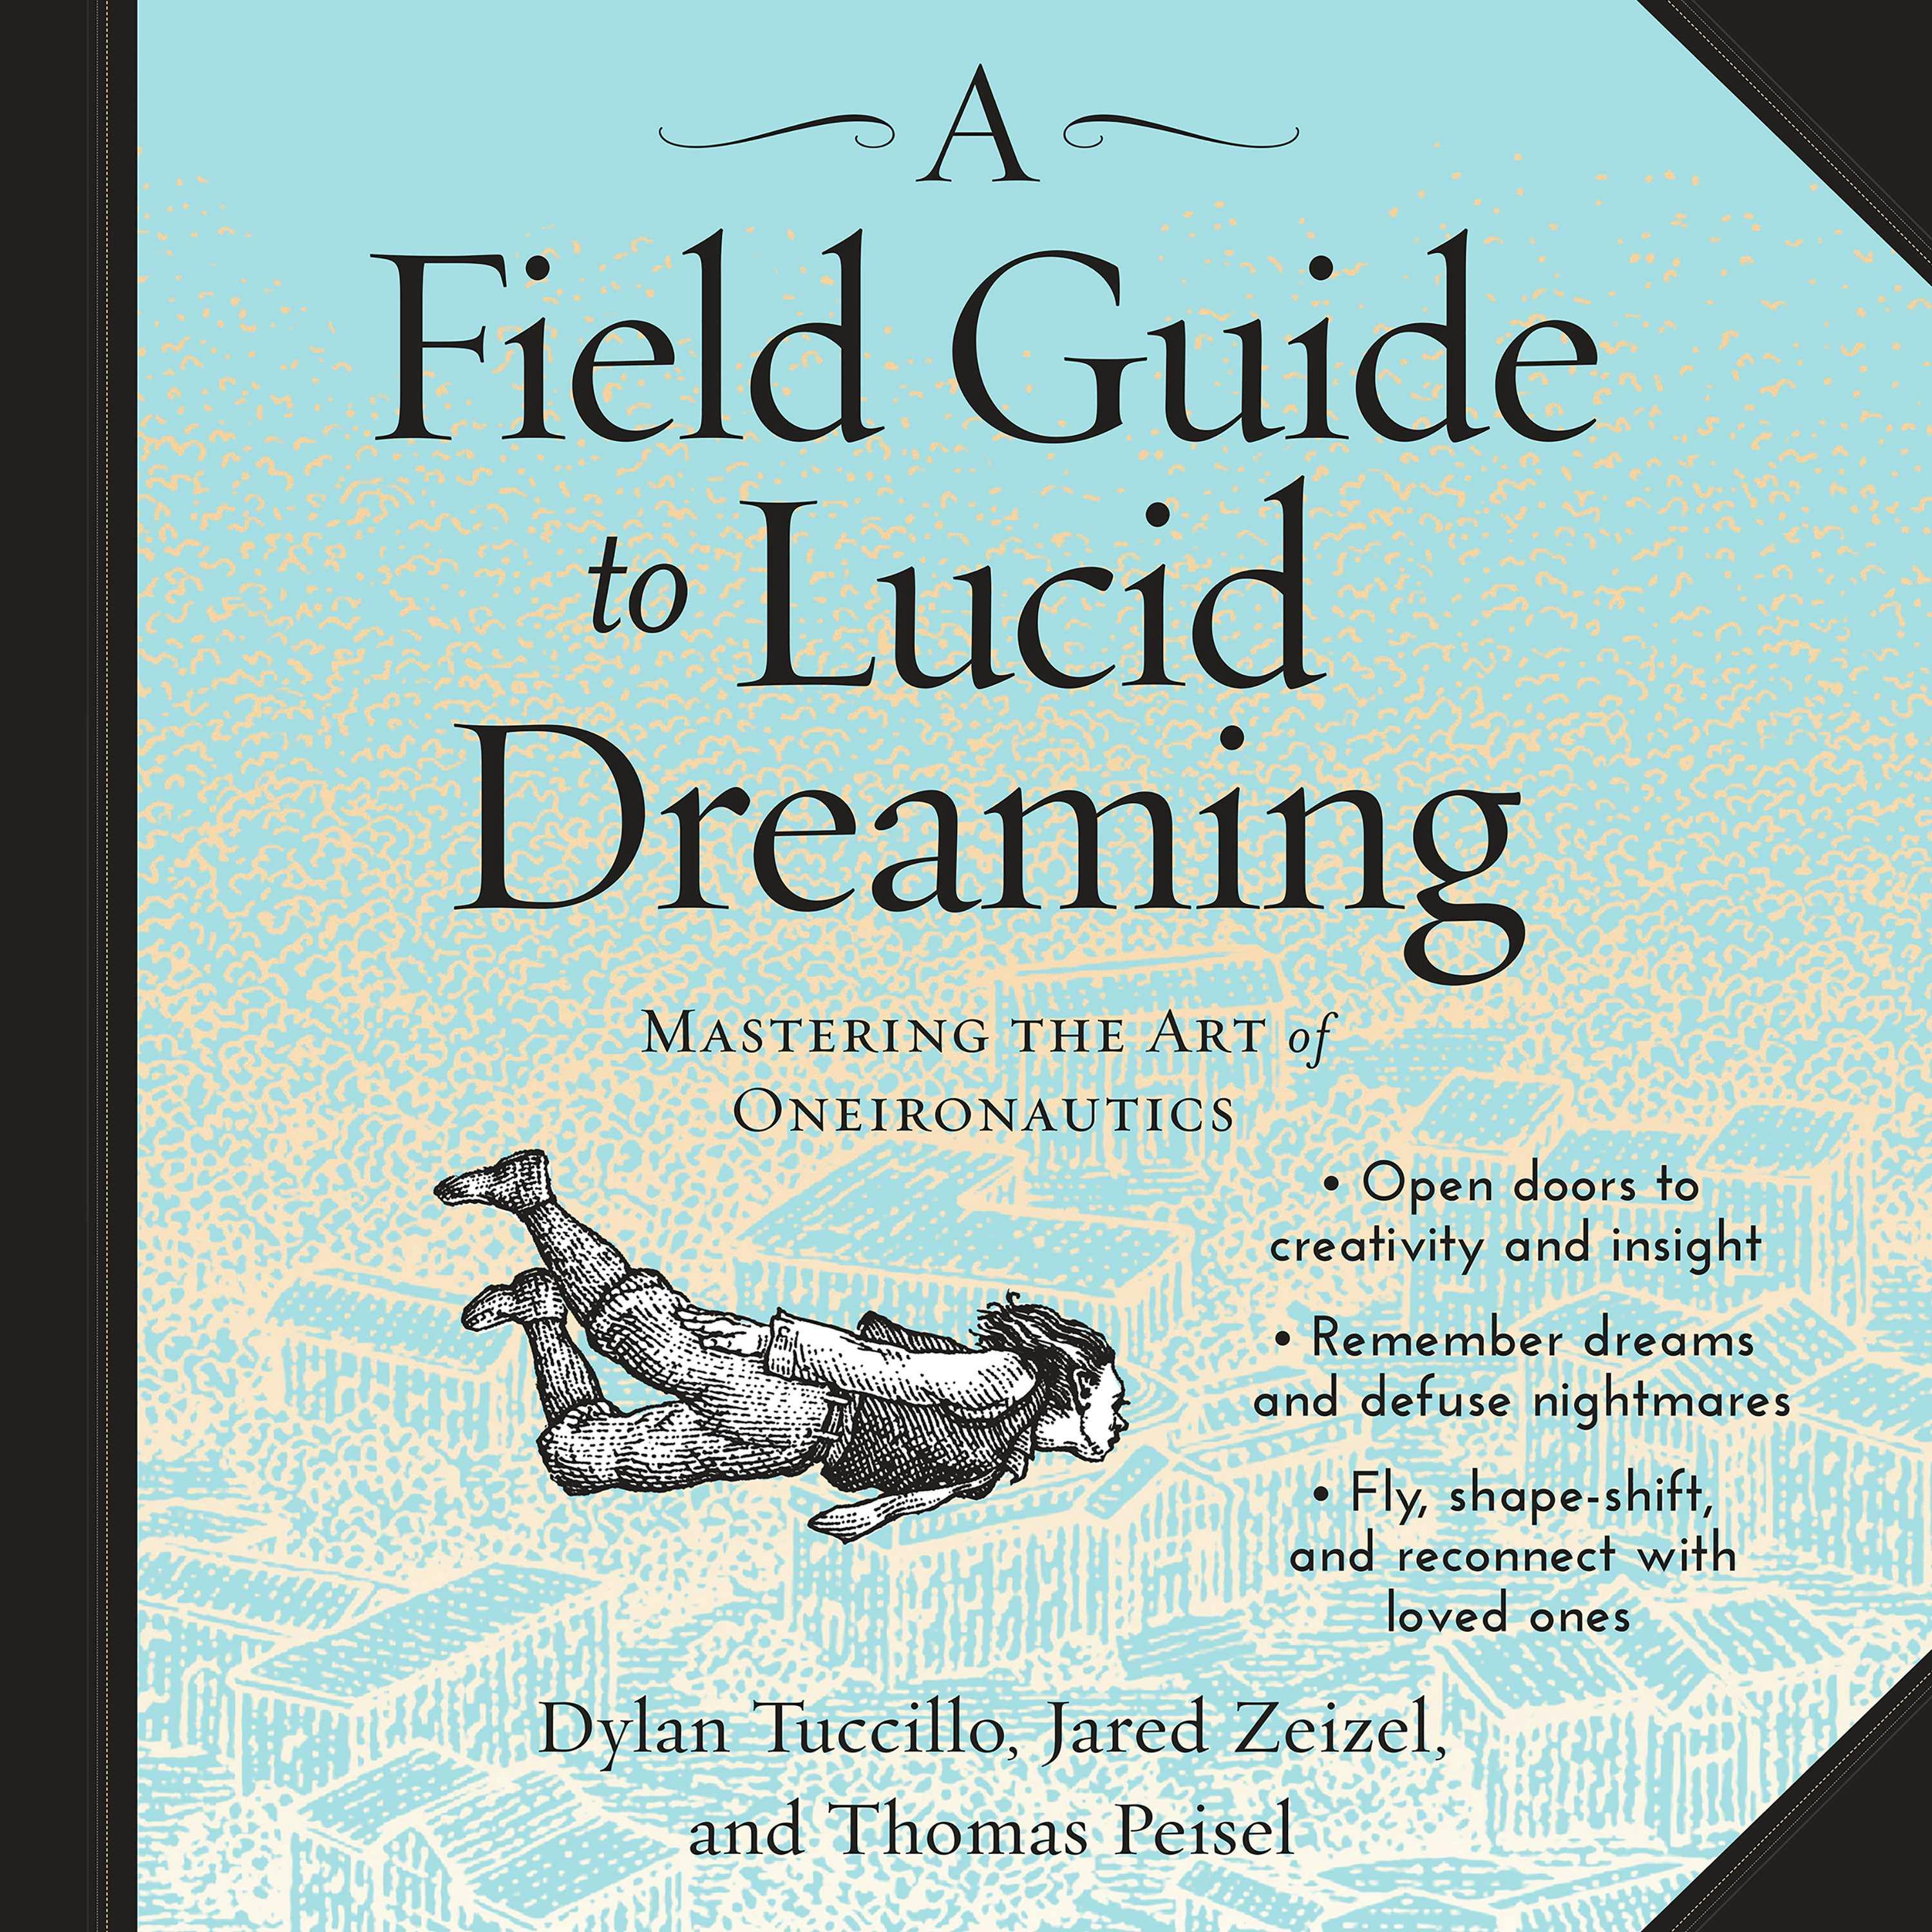 A Field Guide to Lucid Dreaming: Mastering the Art of Oneironautics - Thomas Peisel, Jared Zeizel, Dylan Tuccillo